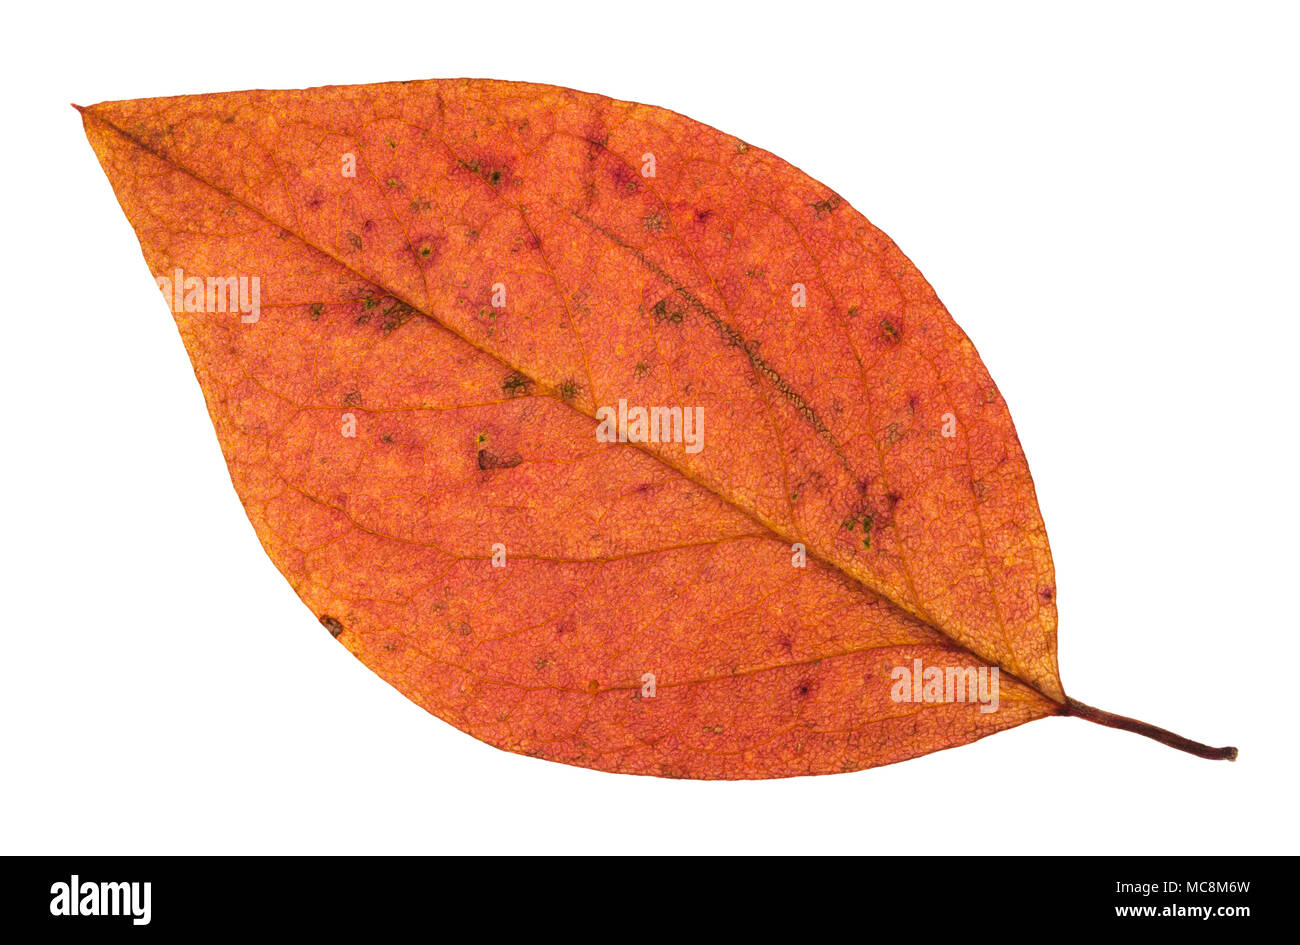 fallen autumn red leaf of apple tree isolated on white background Stock Photo